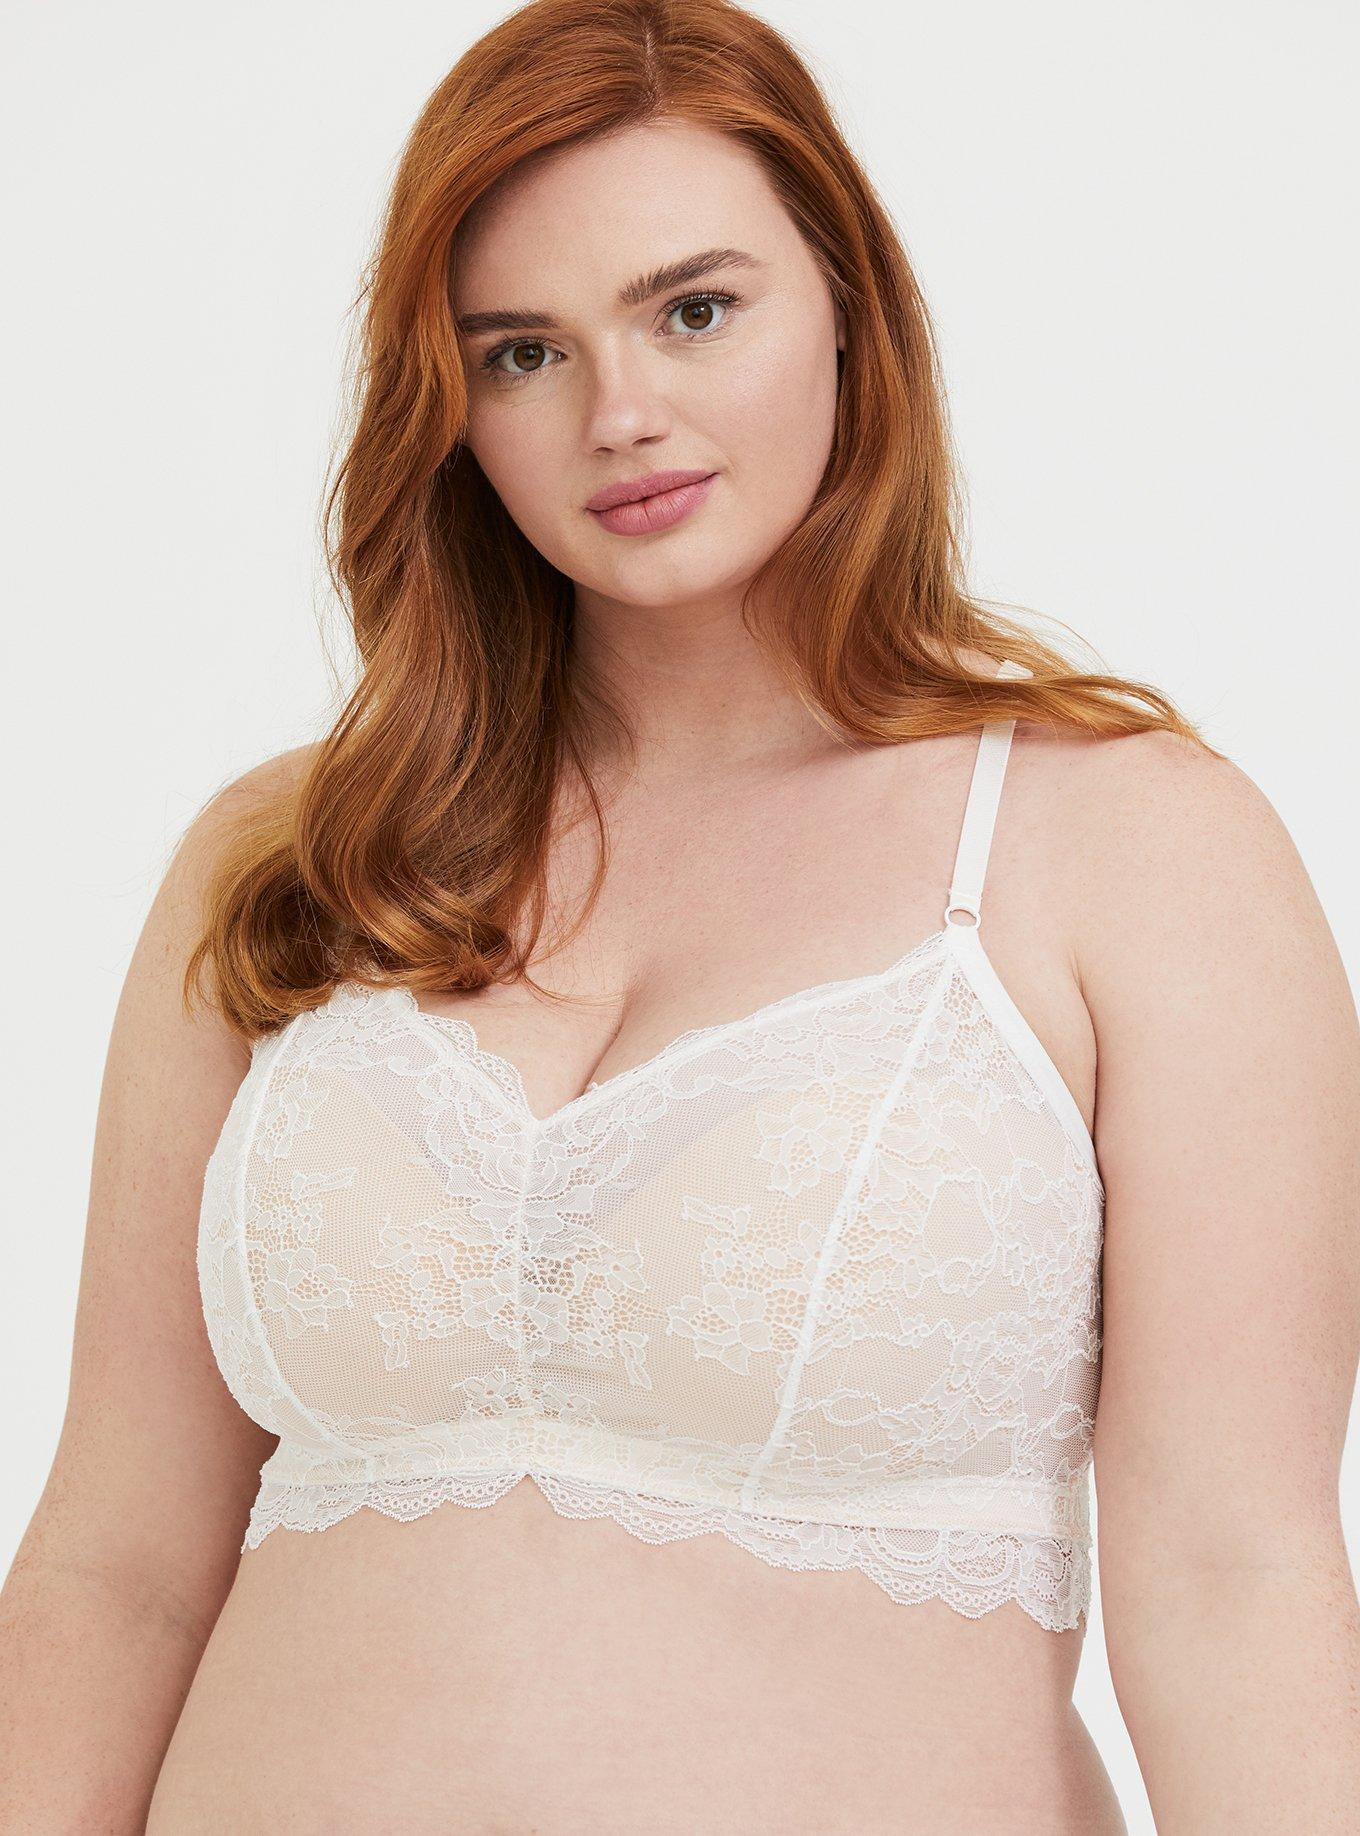 Extra large size Bra Plus Size Full Cup Lace Bra Women's Unlined Full  Coverage Ultra Thin European and American Lingerie